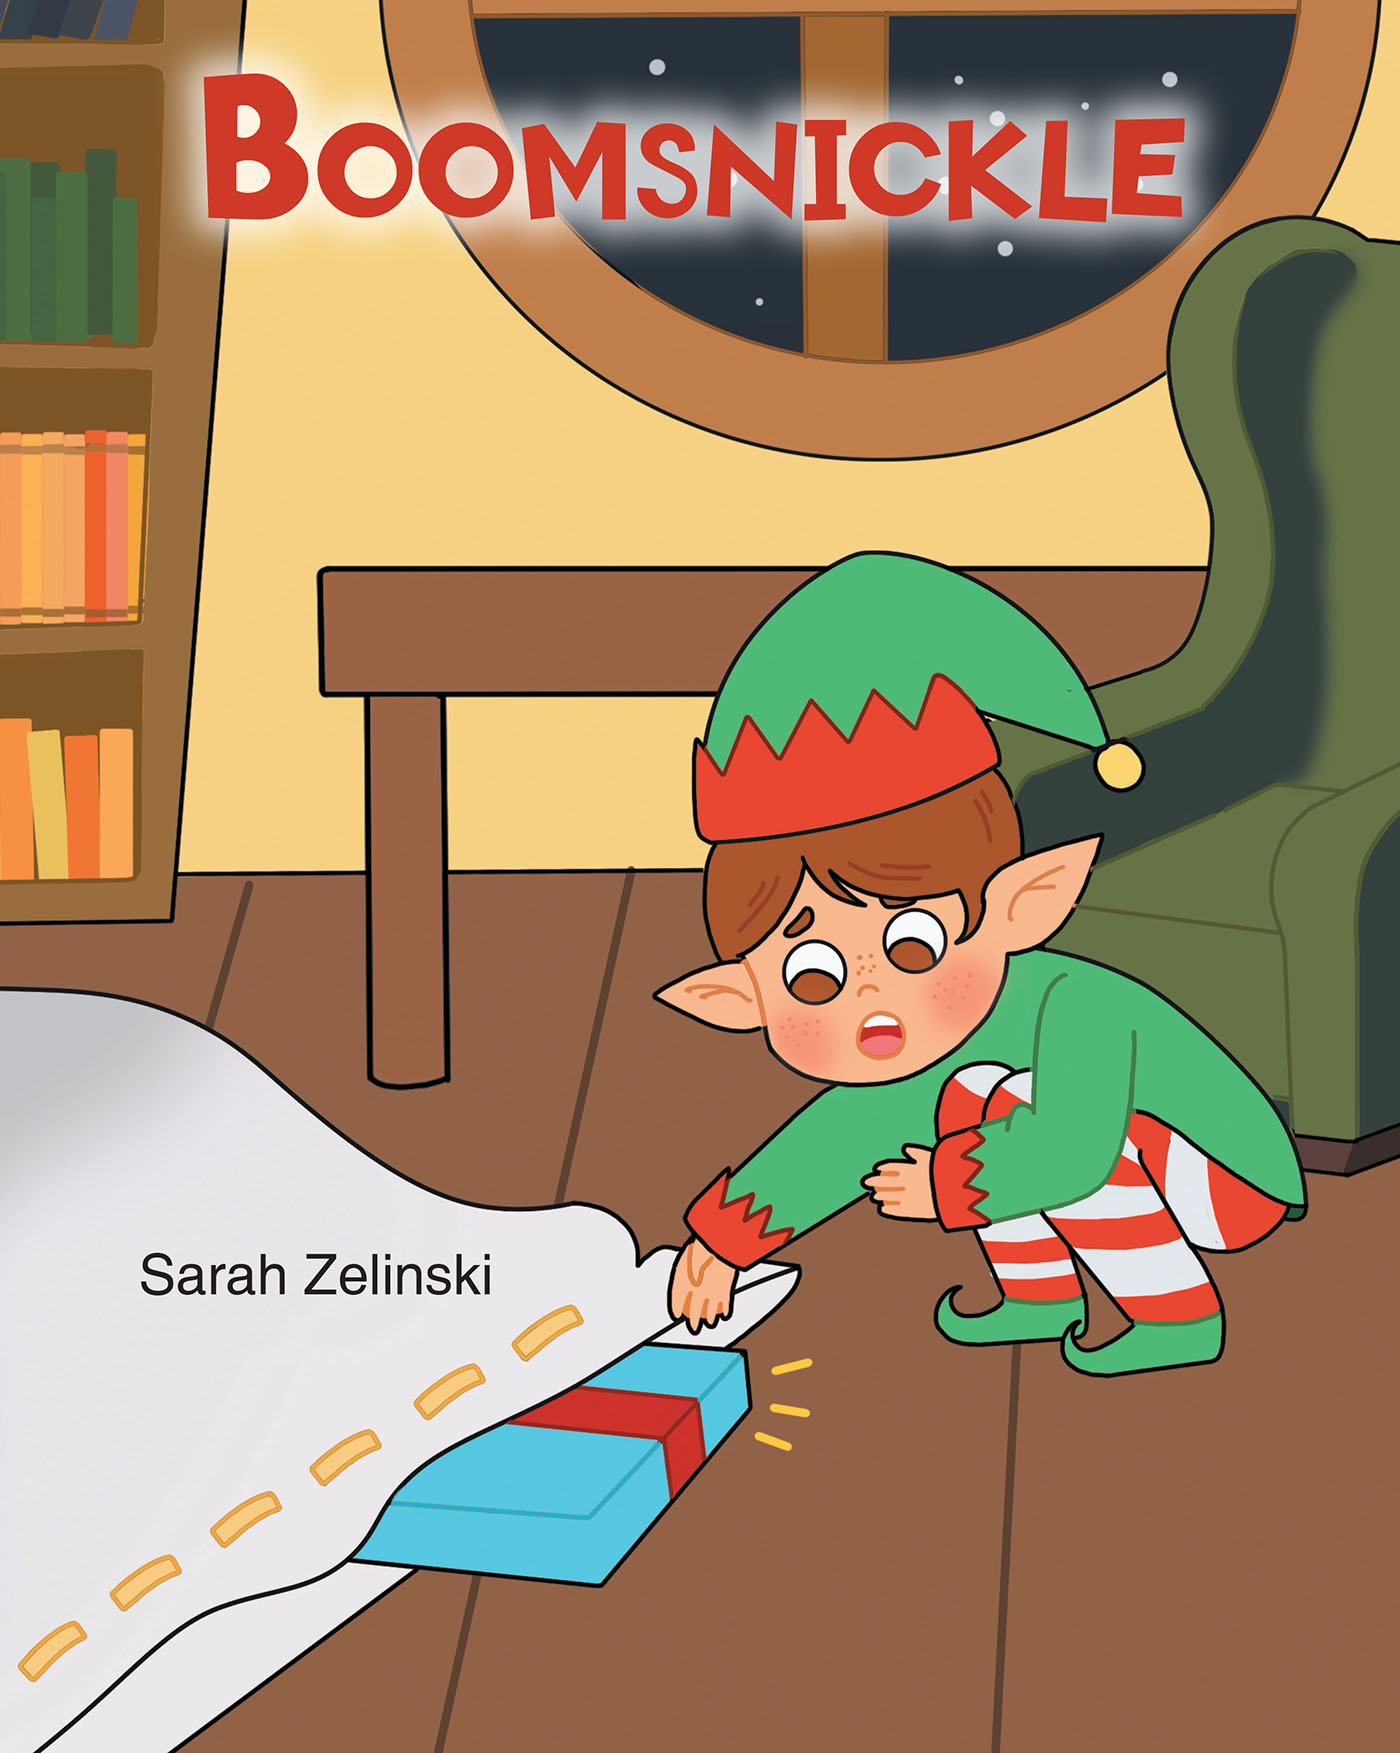 Sarah Zelinski’s Newly Released "Boomsnickle" is a Charming Christmas Tale That Will Delight Young Imaginations